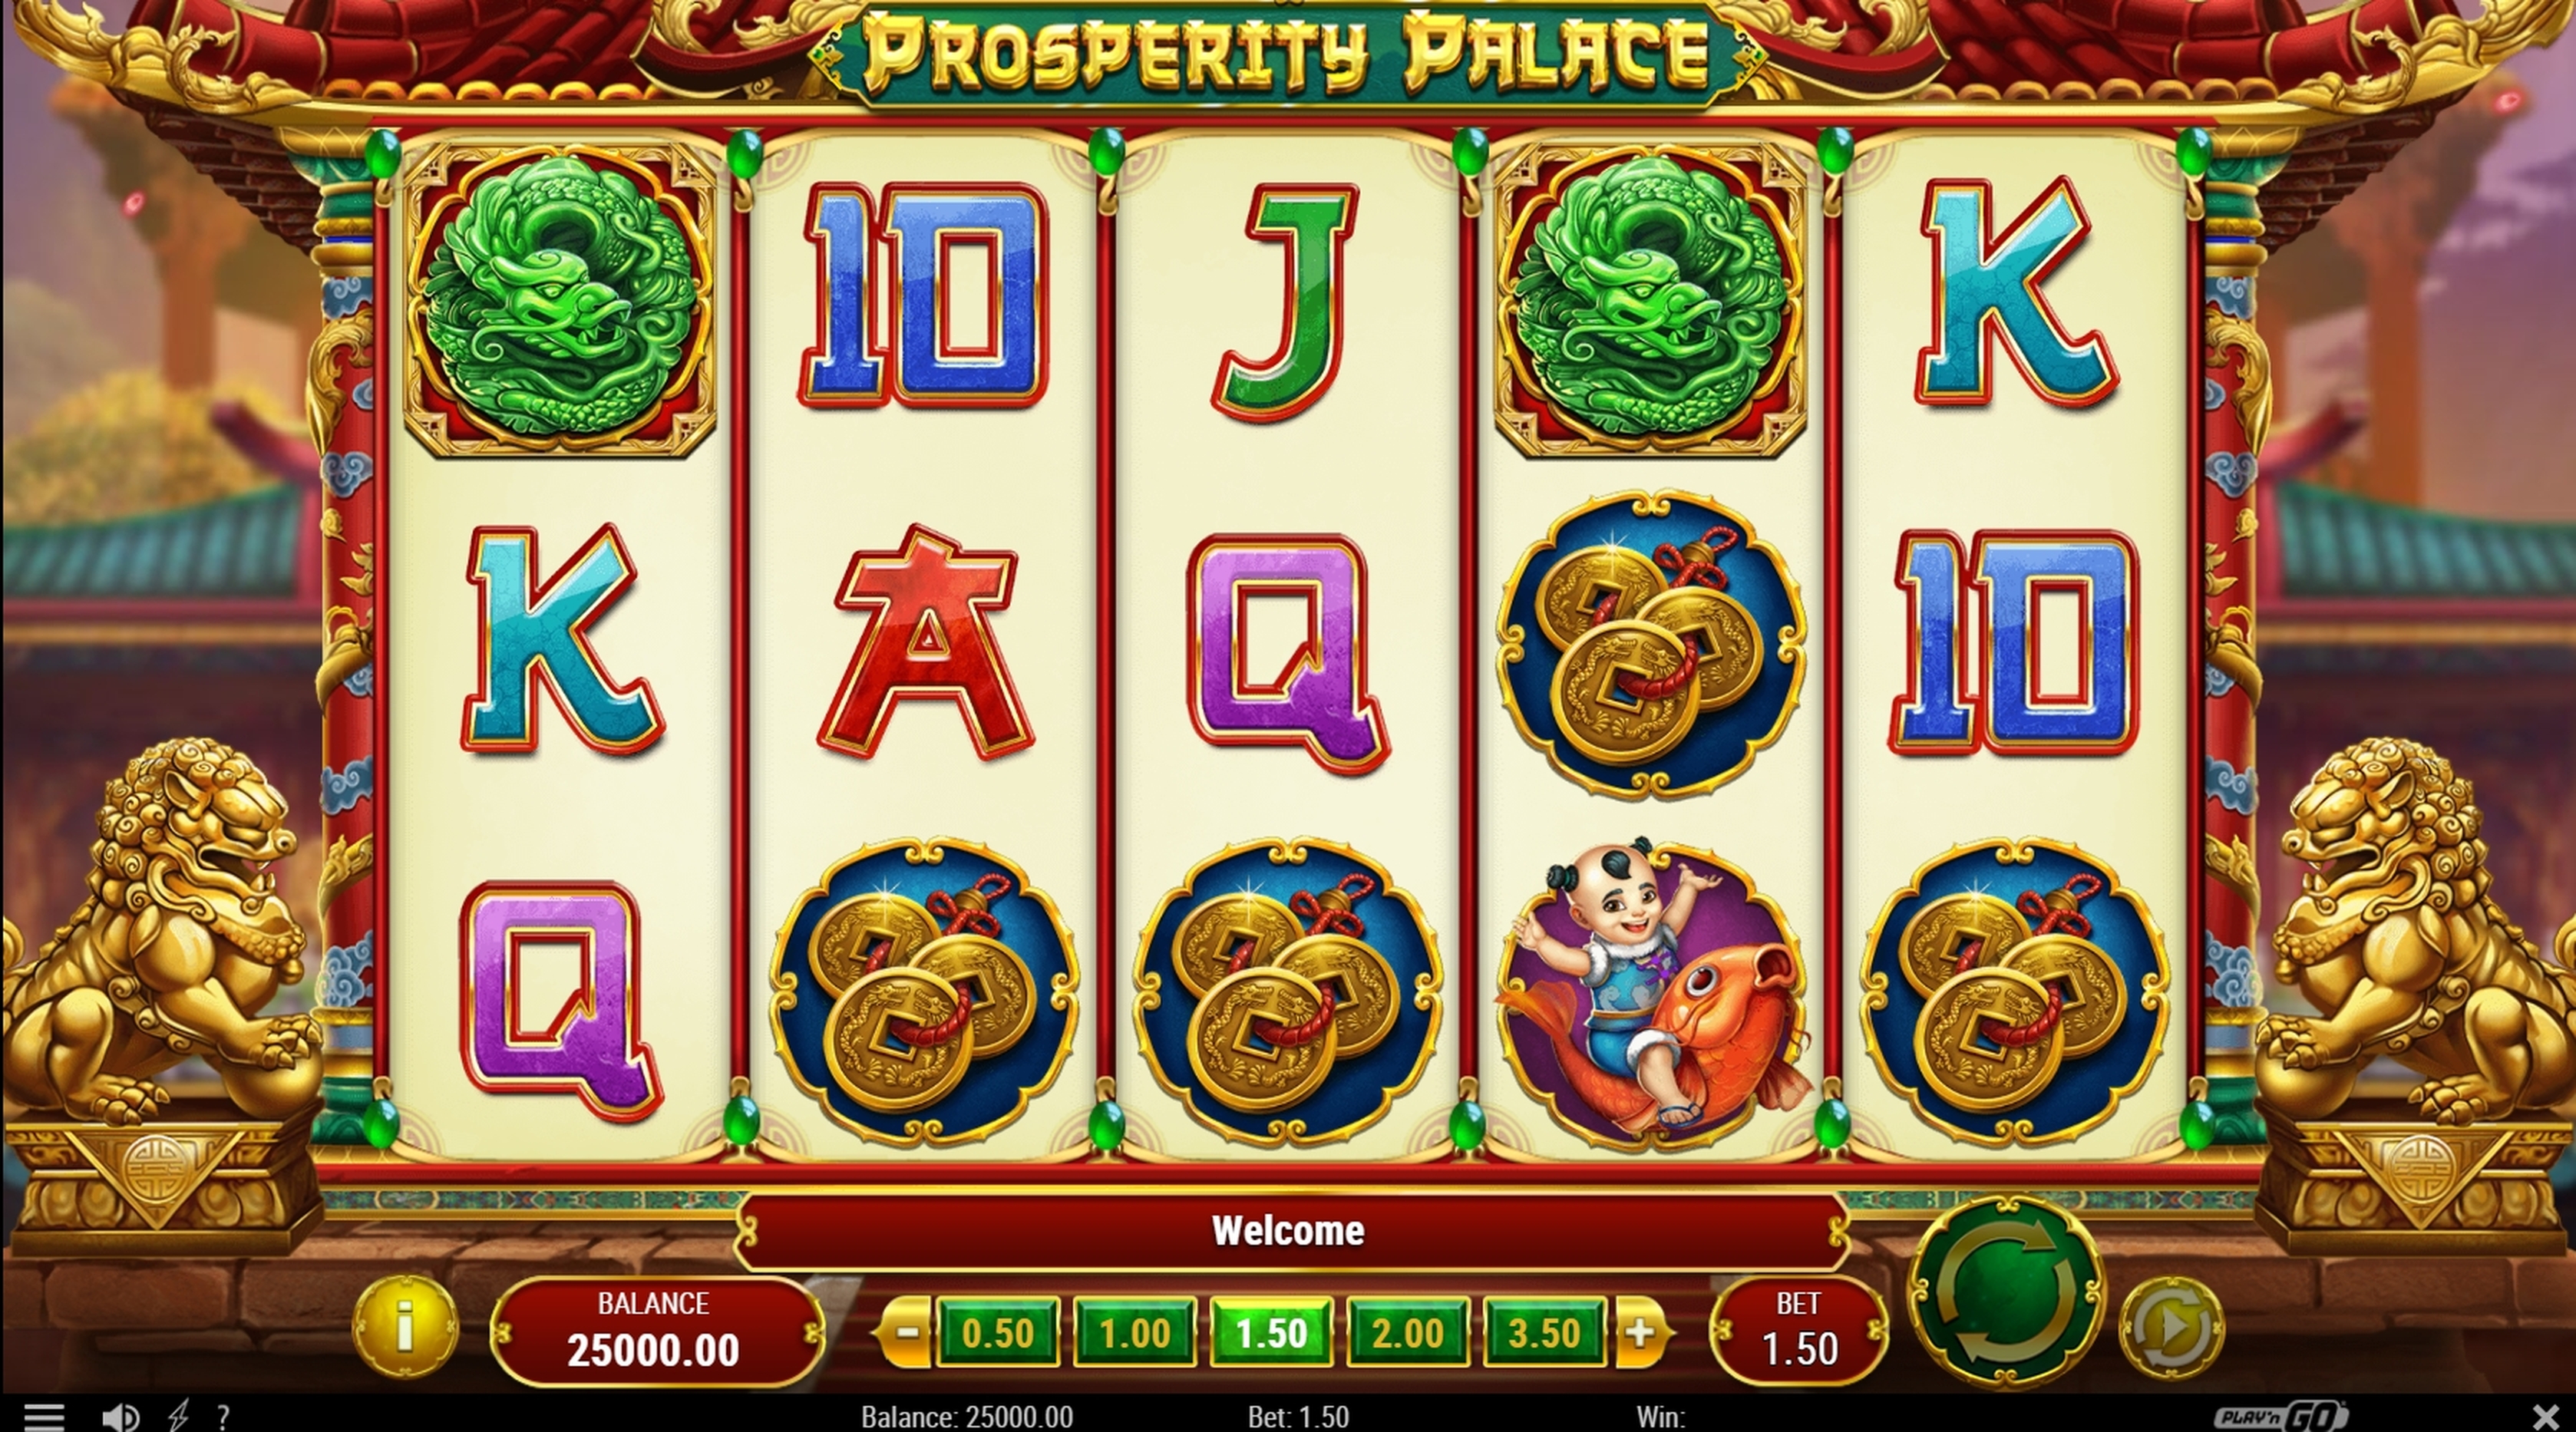 Reels in Prosperity Palace Slot Game by Playn GO